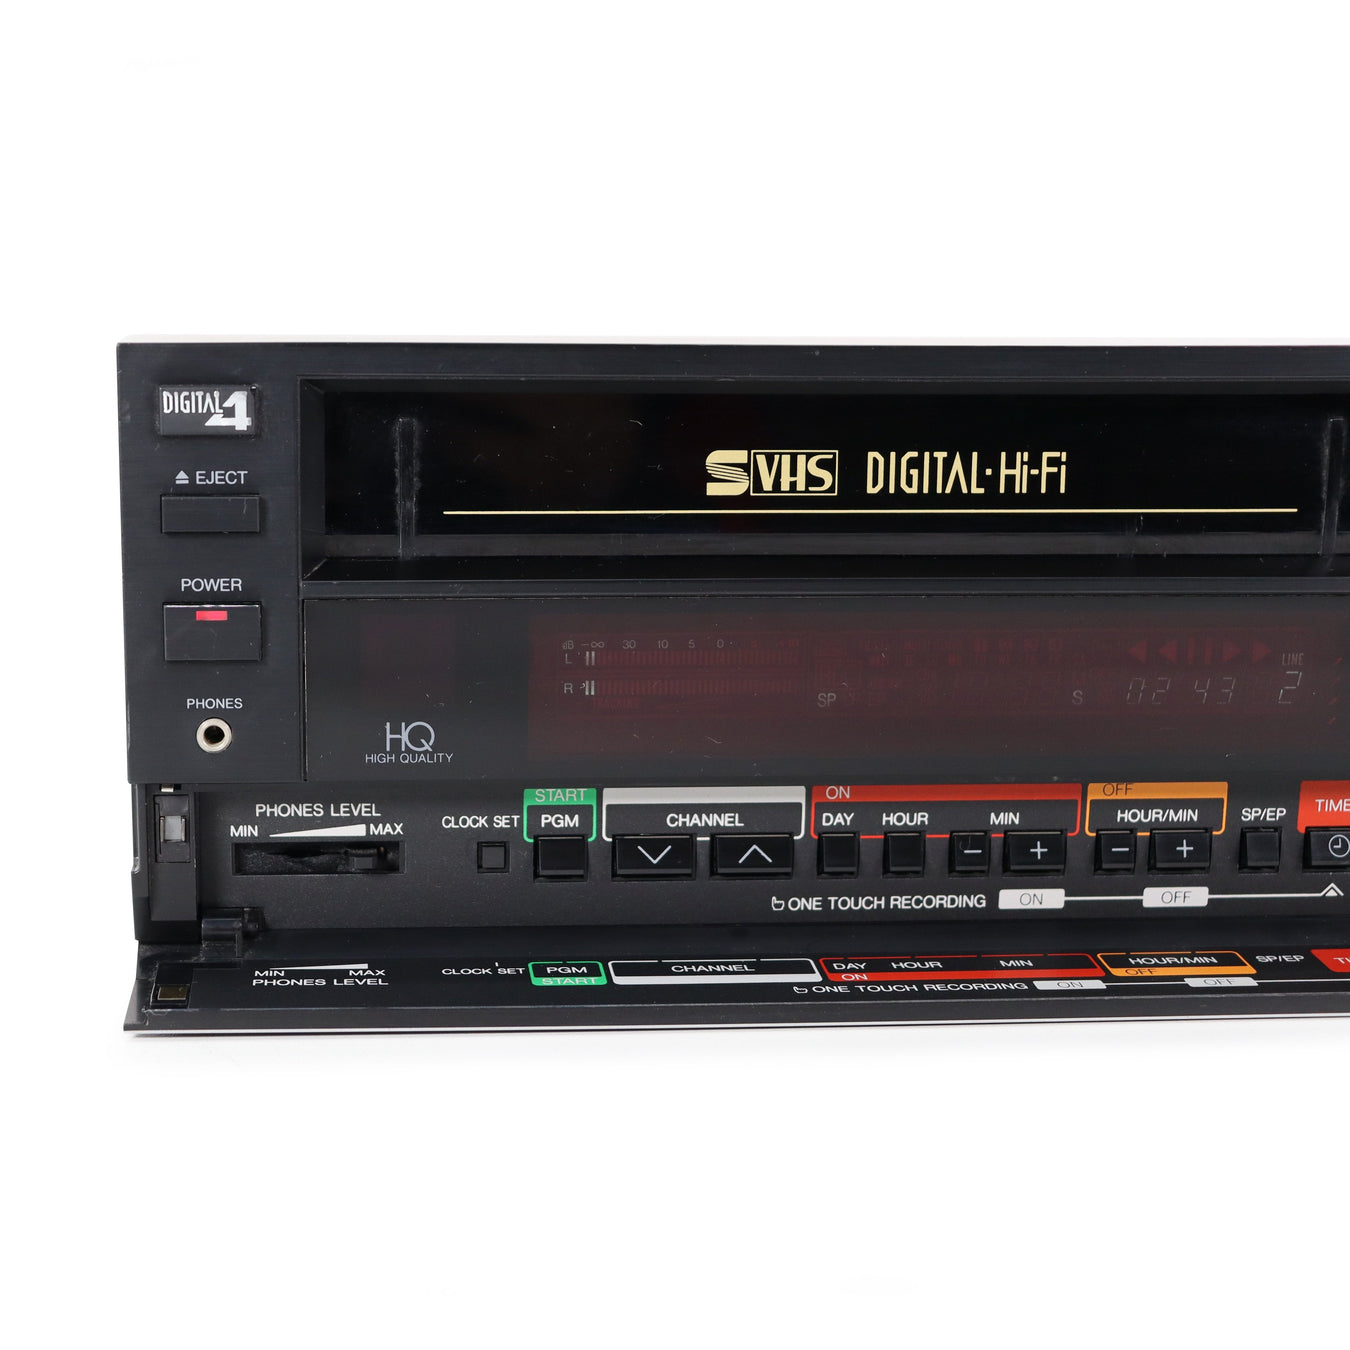 Super VHS S-Video VHS Player Recorder System Home Entertainment system high resolution video cassette recorder